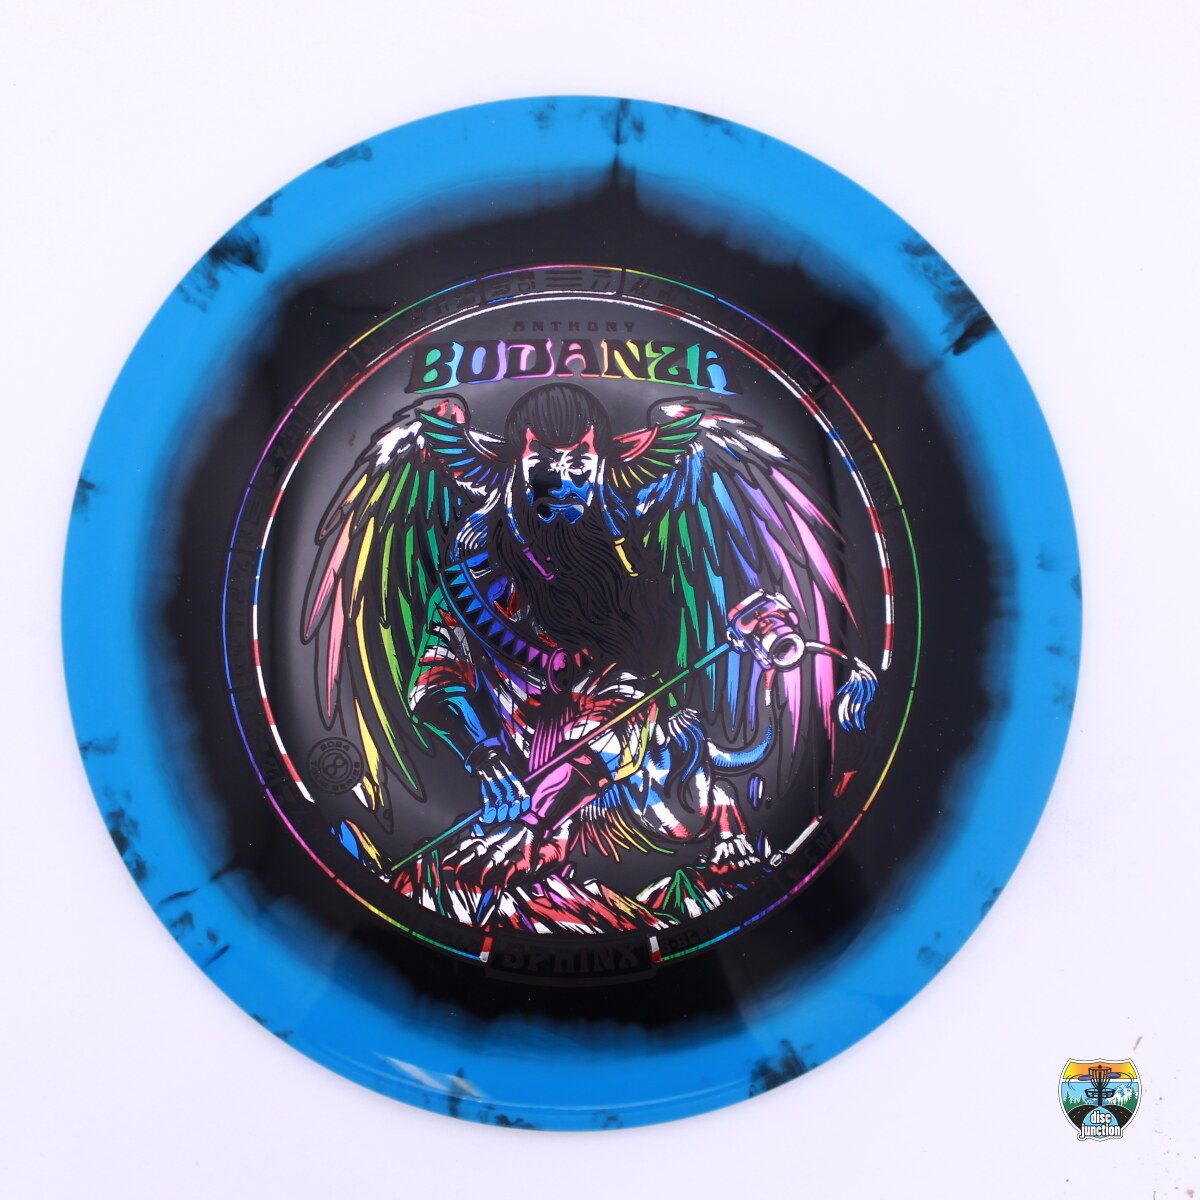 Infinite Discs Halo S-Blend Sphinx 2024 Tour Series Anthony Bodanza, Manufacturer Weight Range: 173-176 Grams, Color: Black/Blue, Serial Number: 0204-0066